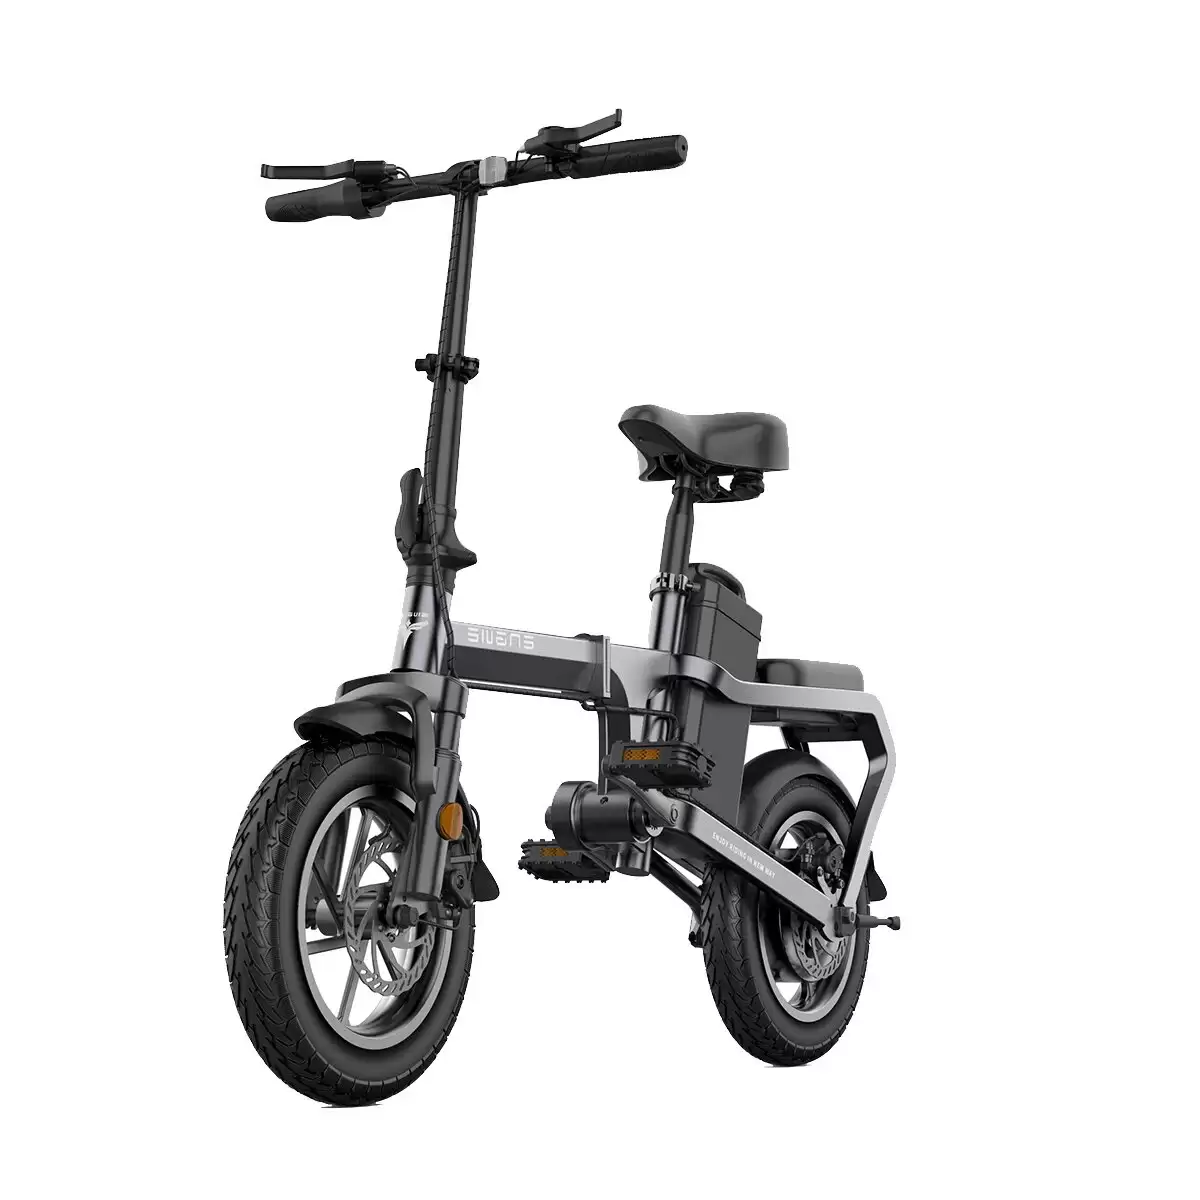 Order In Just $660.10 [eu Direct] Engwe X5s 15ah 48v 350w 14in Chainless Folding Electric Bike With This Coupon At Banggood